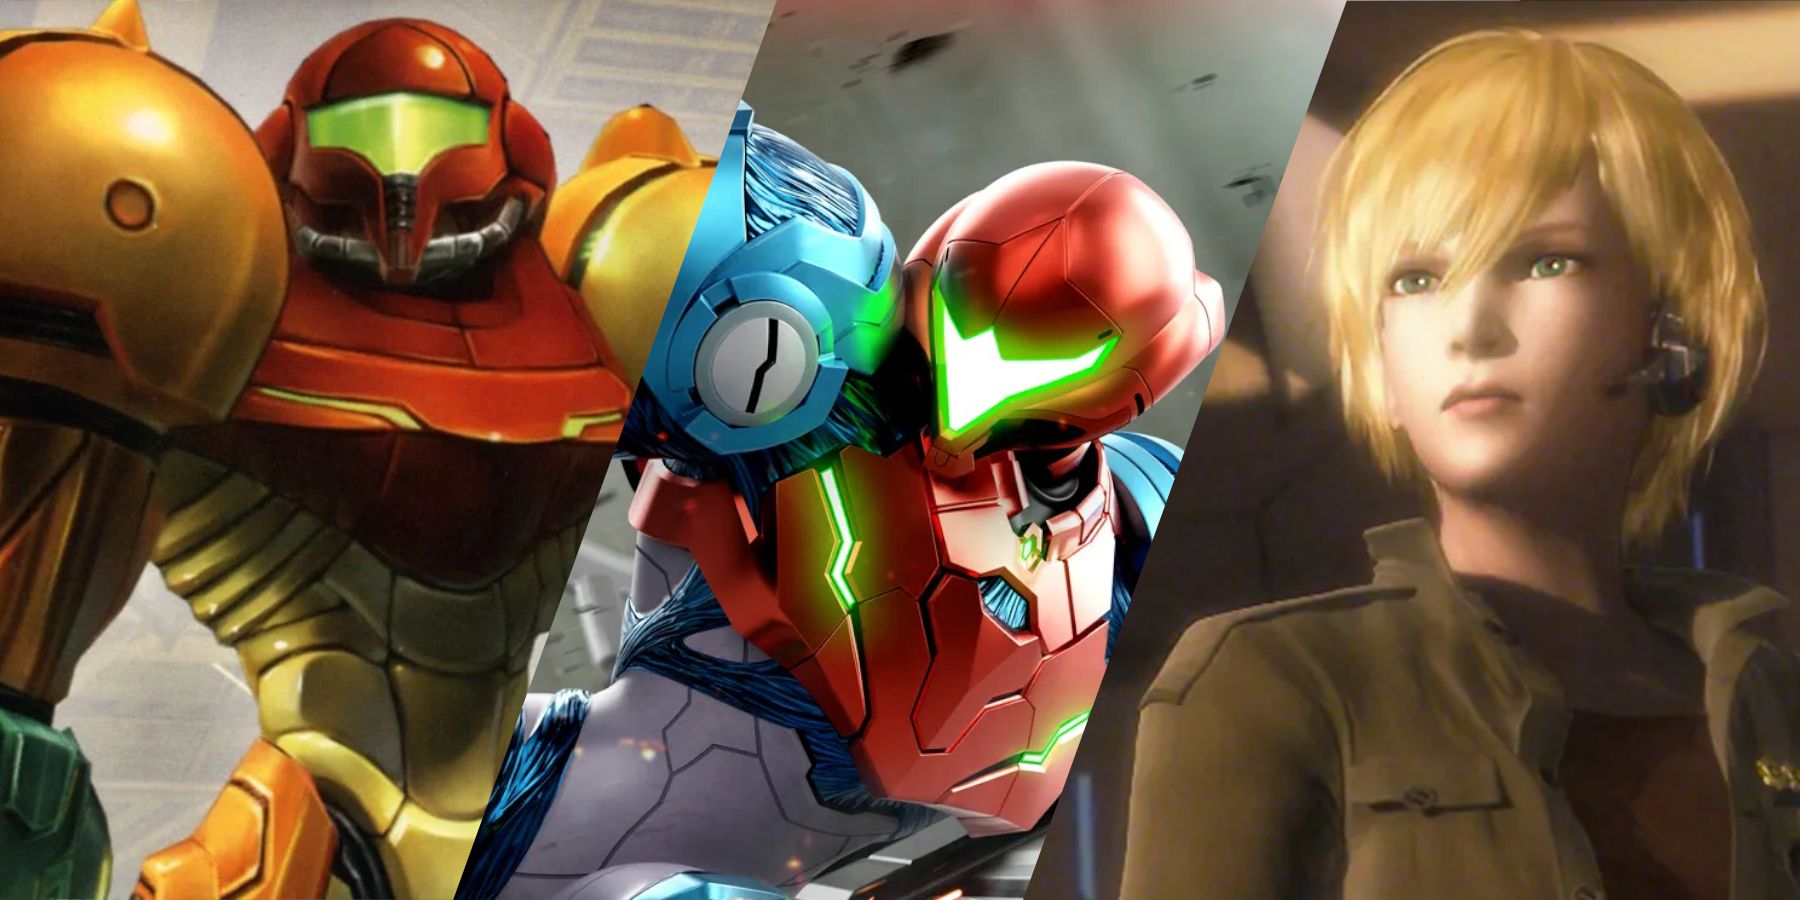 A three-way splitscreen of Samus as she appears in Metroid Prime, Metroid Dread, and Metroid Other M